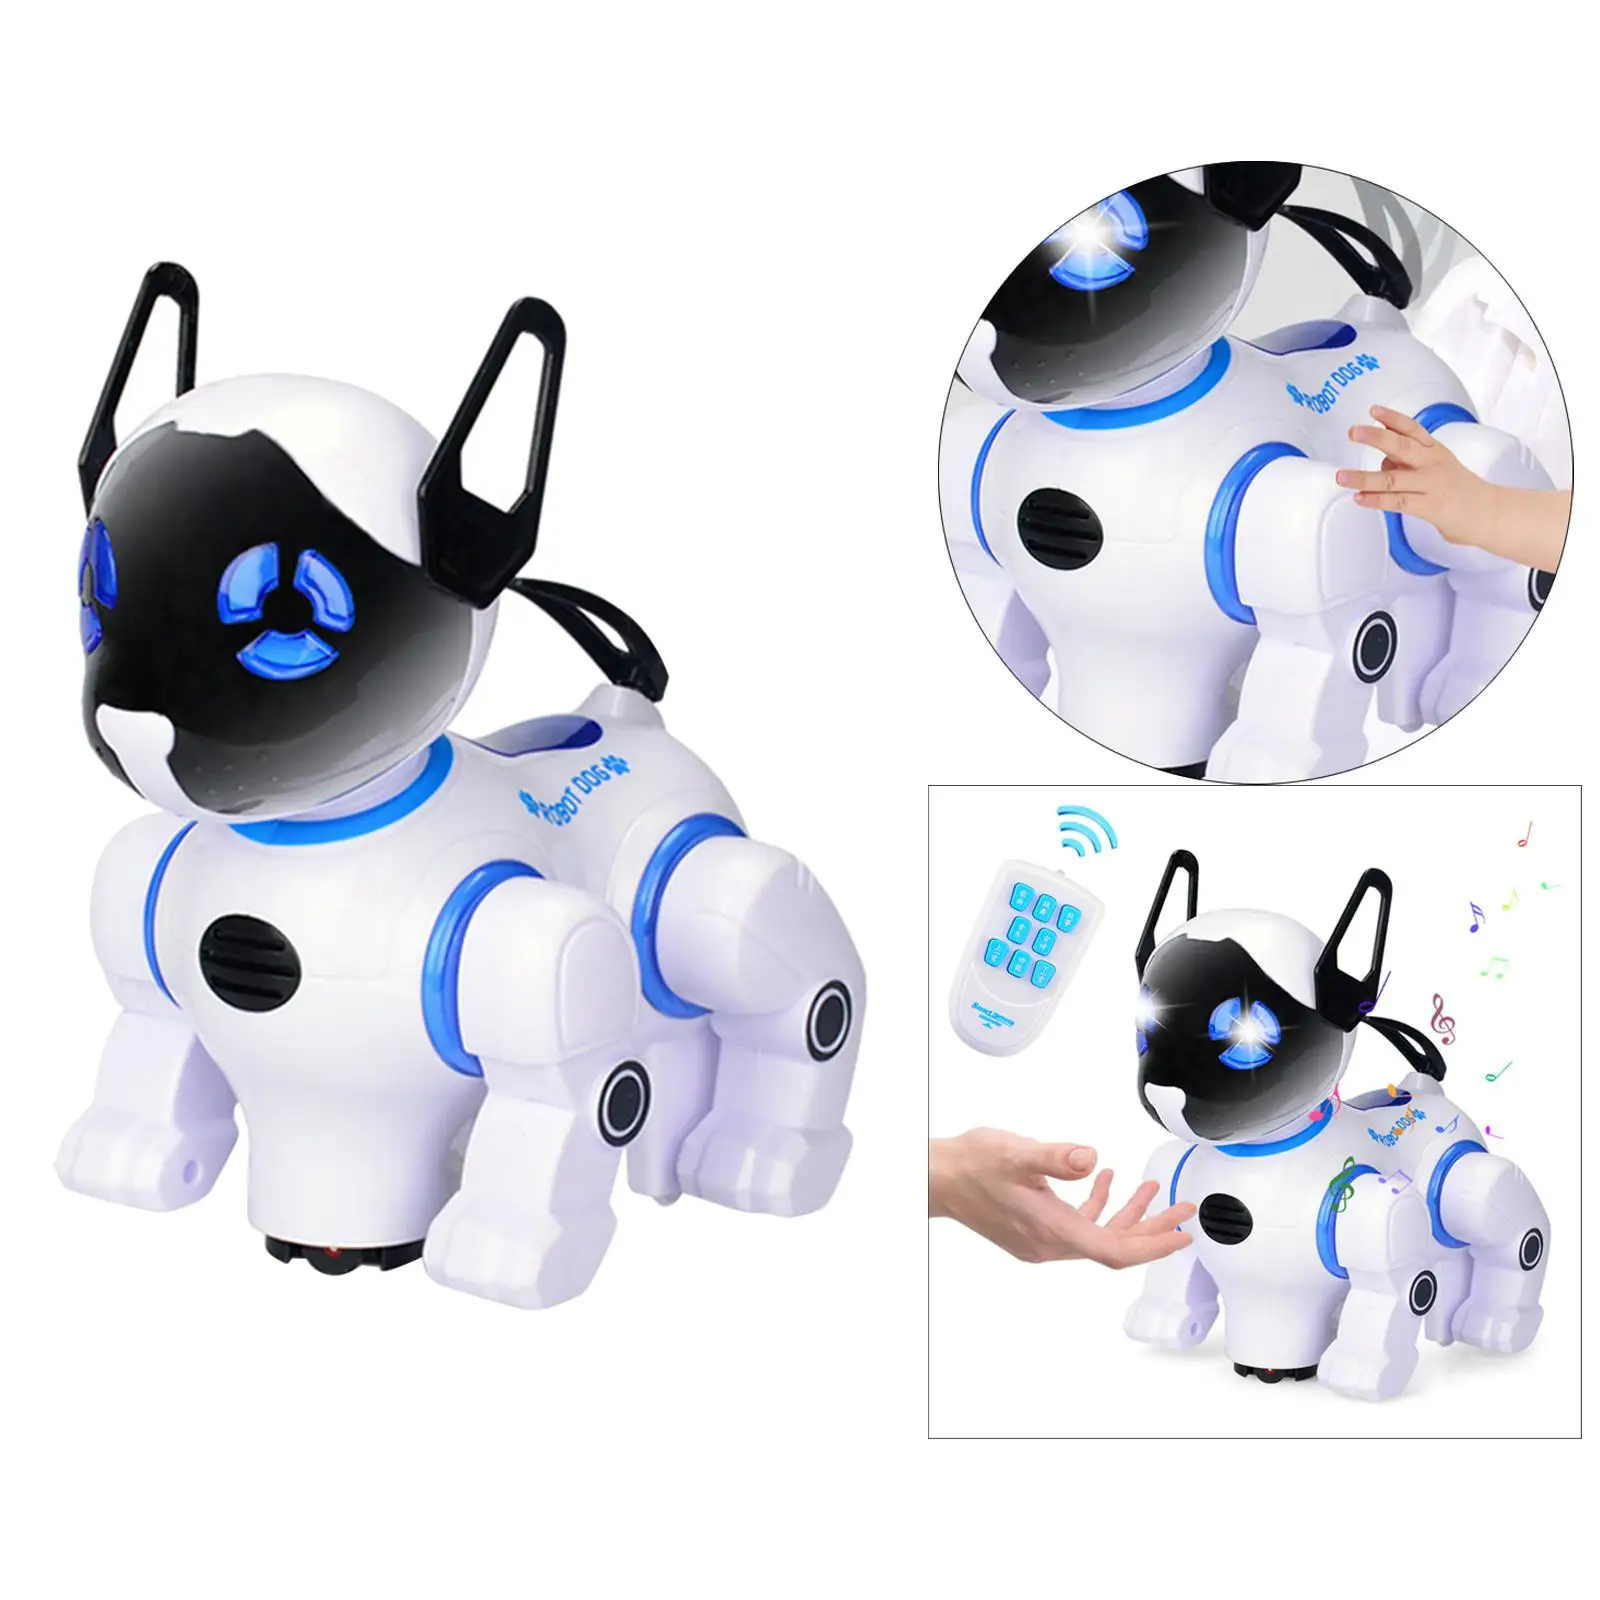  Remote Control Robot Dog Toy Electronic Toys Xfor Boys And Girls Age 5 6 7 8 9 10 Children Birthday Gift